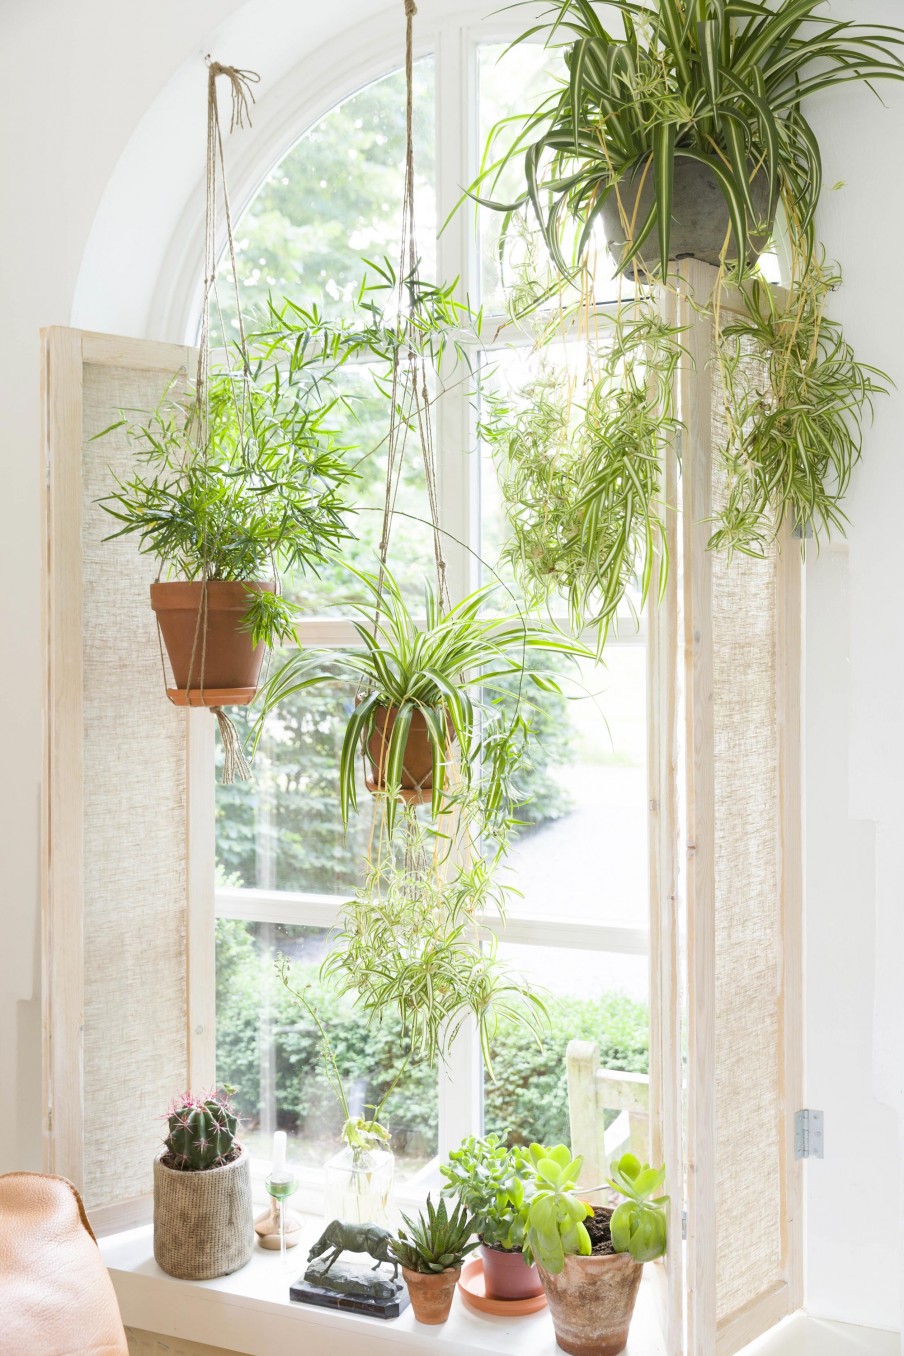 7 types of indoor plants that are safe for pets - Photo 7.